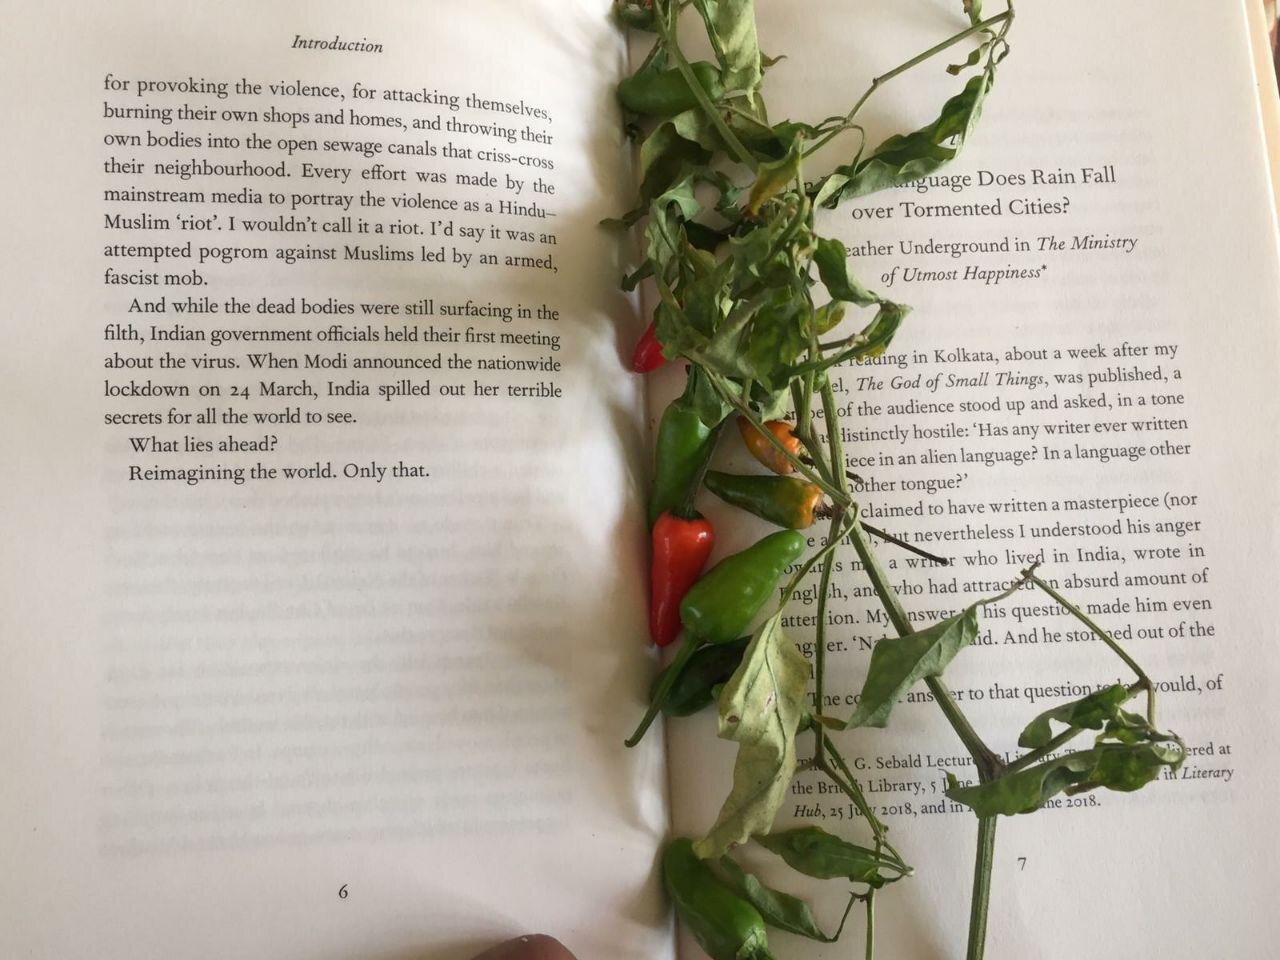 That’s what happens when you go out to read and you find hot peppers on the ground. The book becomes a basket!